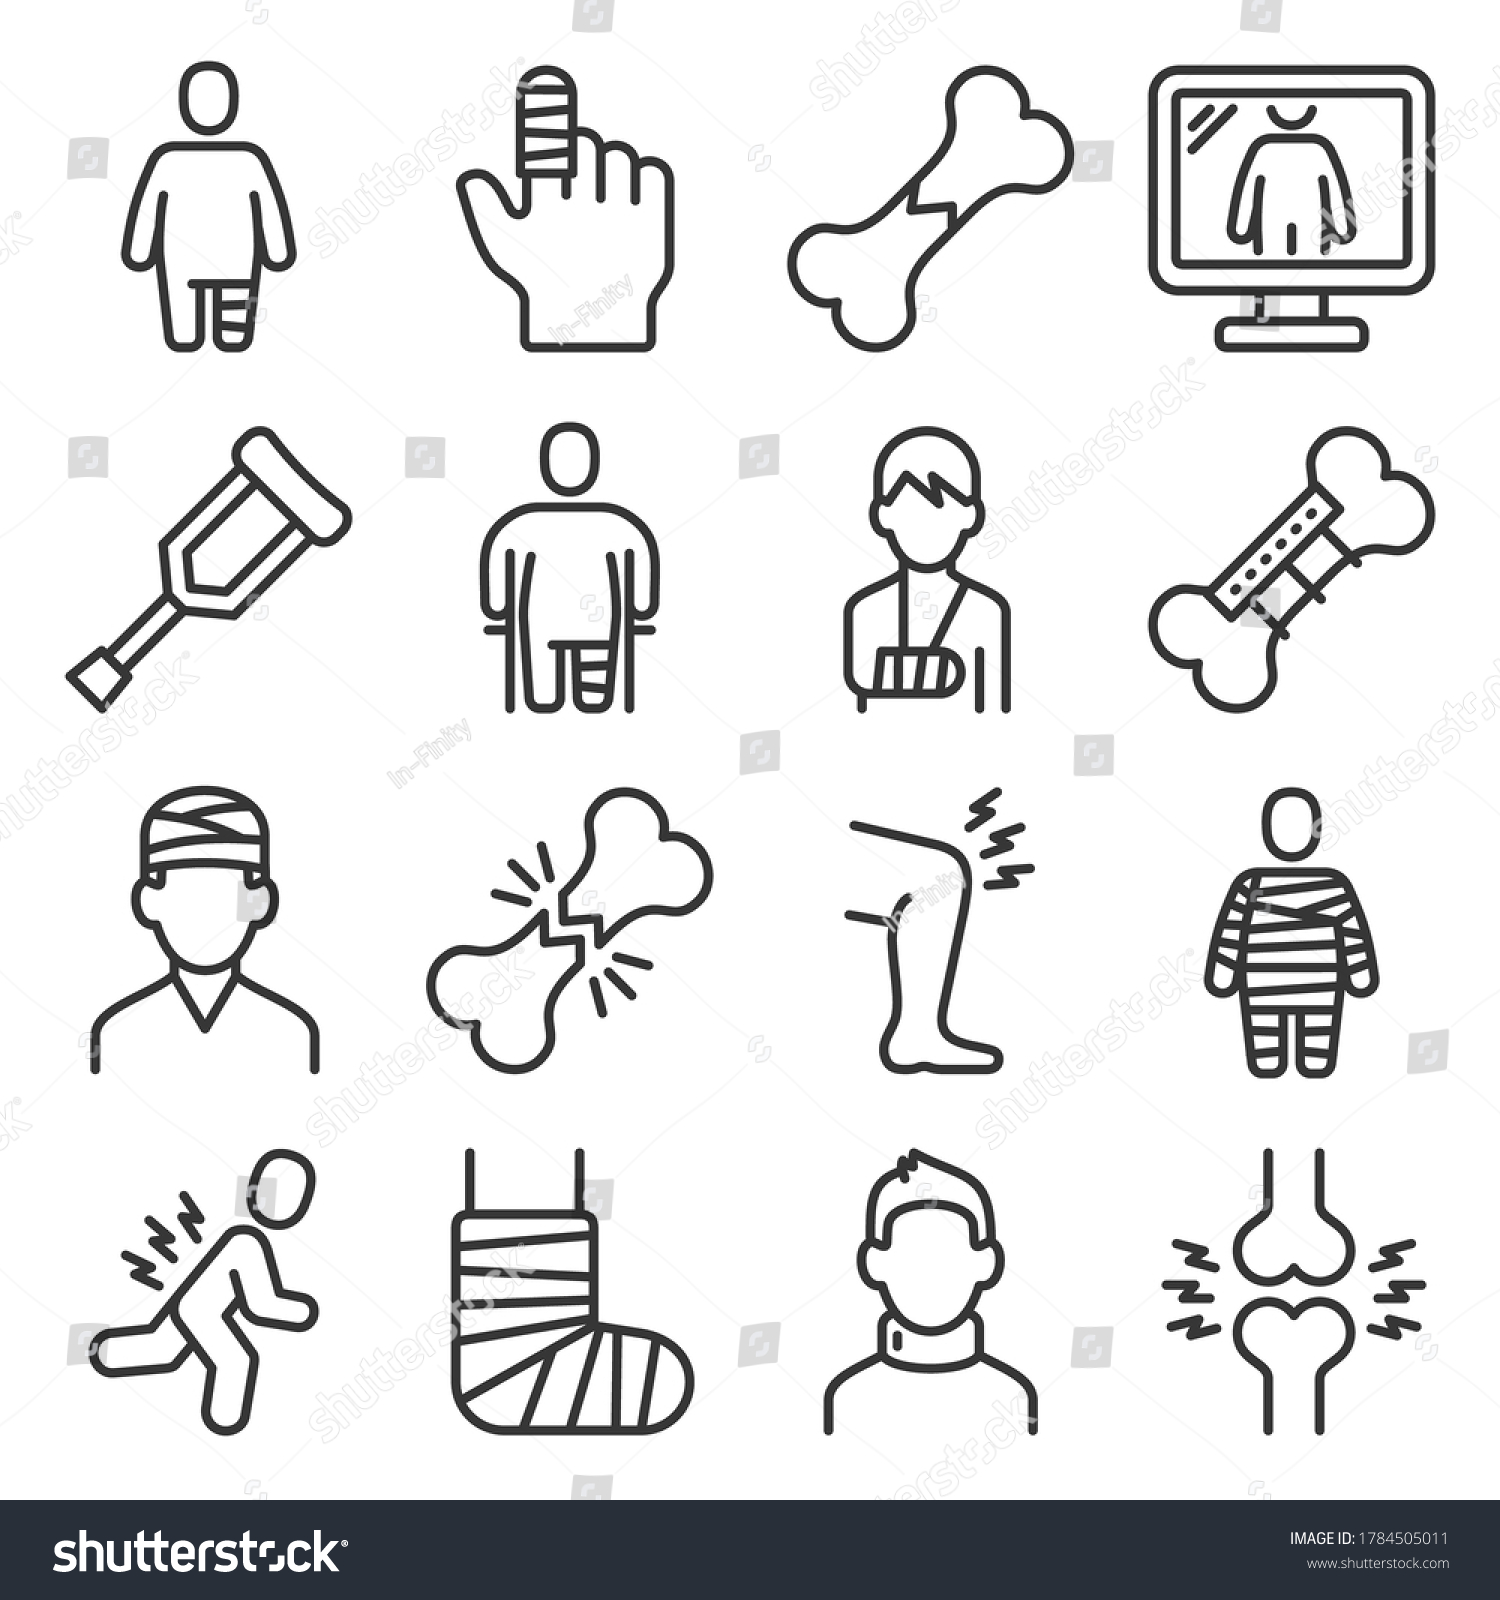 SVG of Fracture Bone Icons Set on White Background. Vector svg